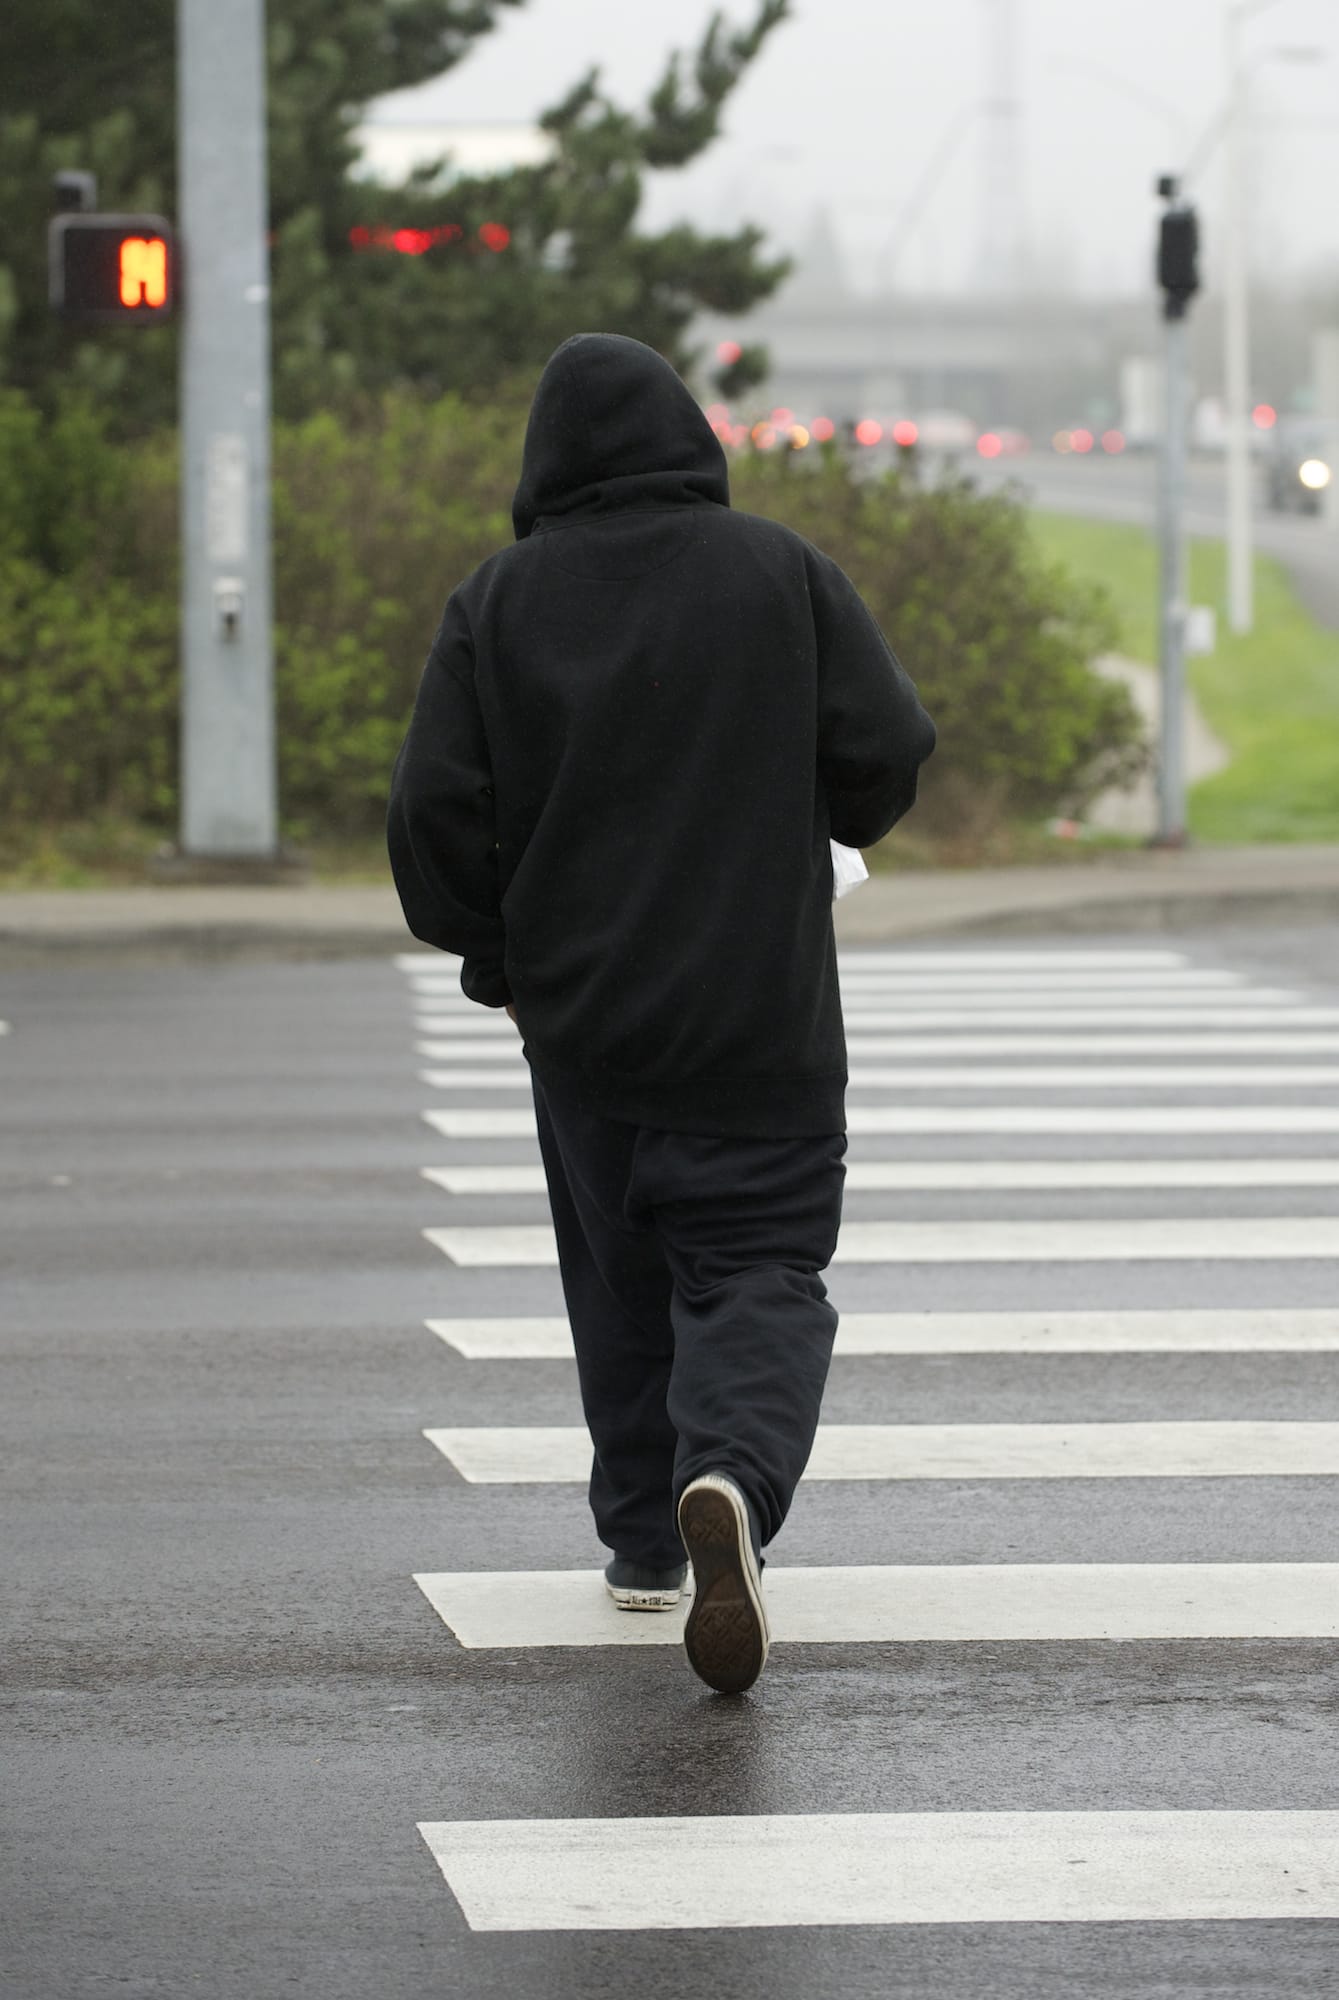 A pedestrian crosses Fourth Plain Boulevard at Andresen Road in Vancouver.